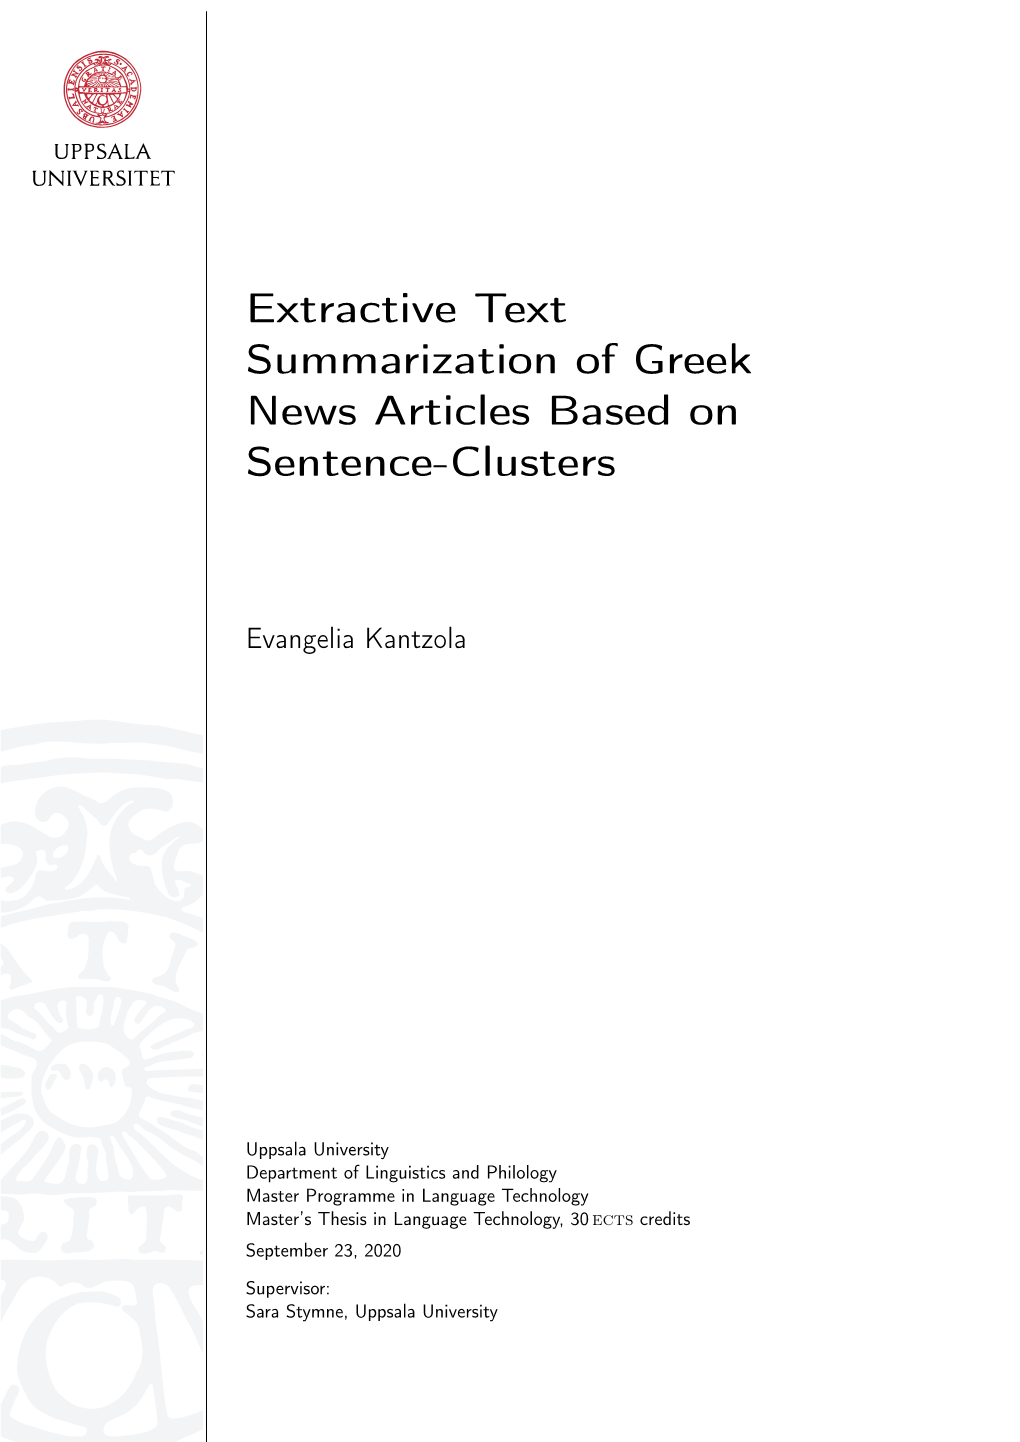 Extractive Text Summarization of Greek News Articles Based on Sentence-Clusters